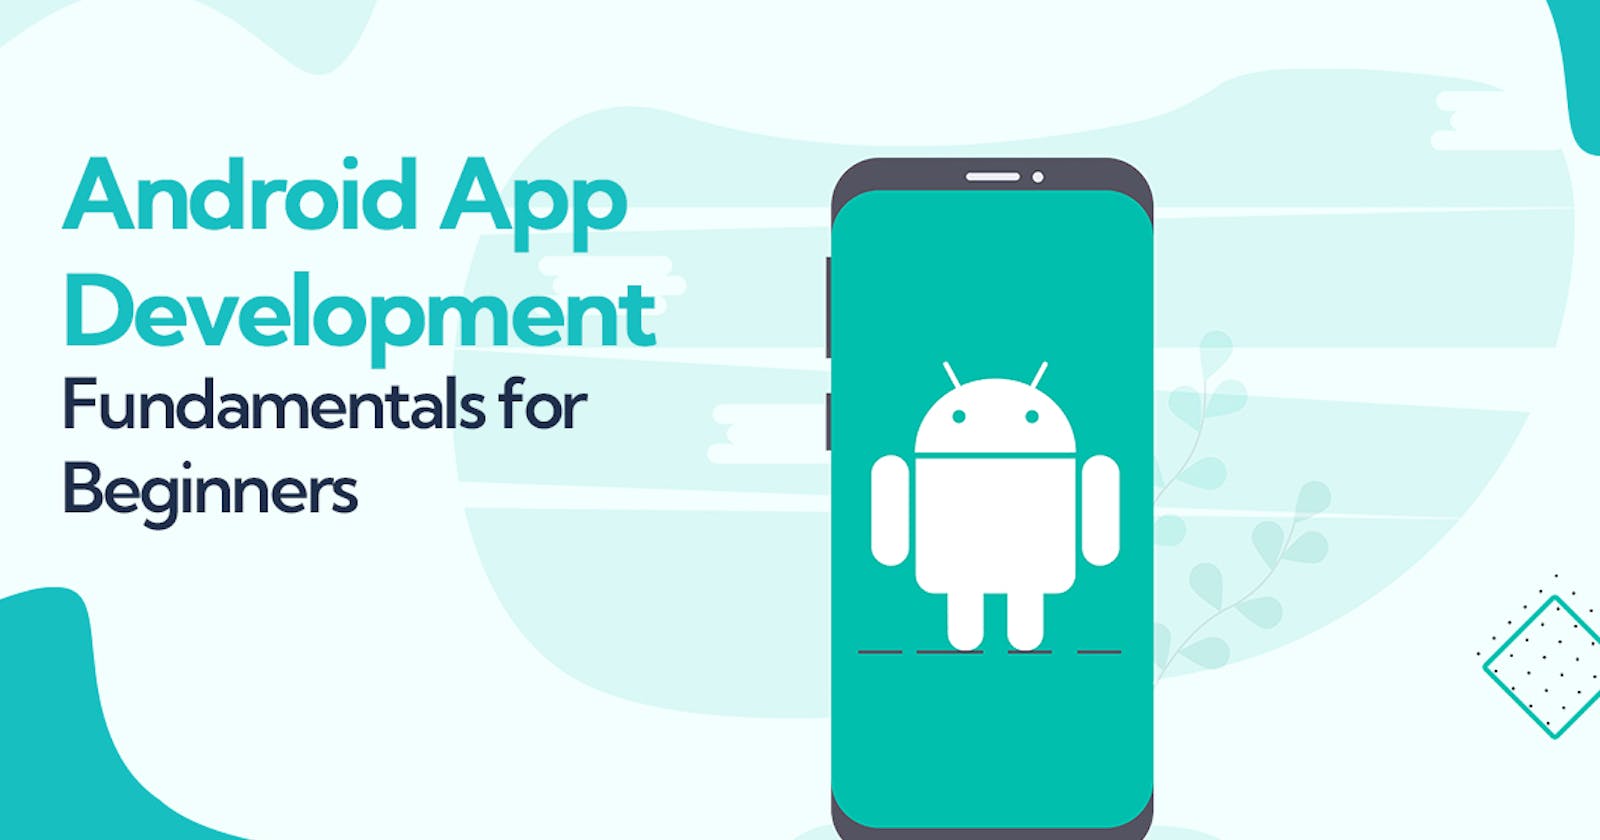 Android App Development Fundamentals for Beginners